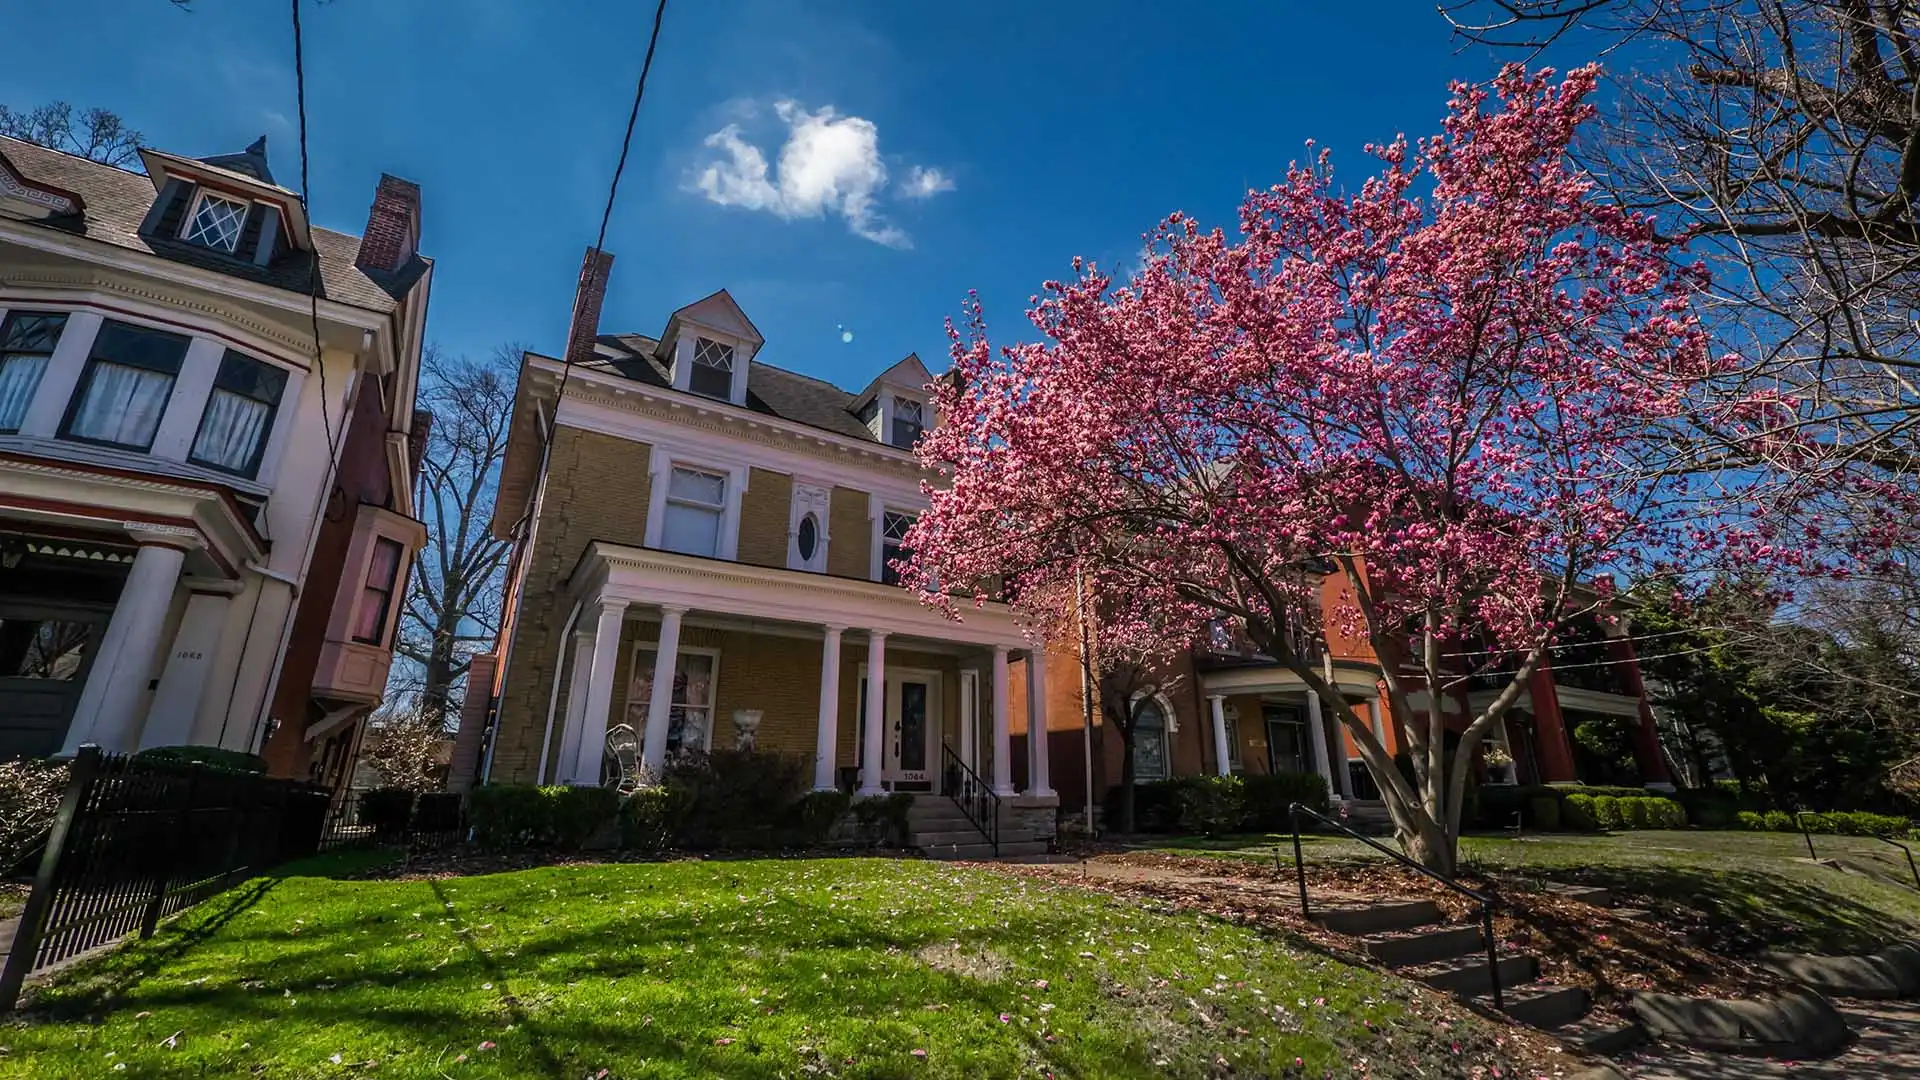 A House In Louisville With Trees Blooming In The Spring